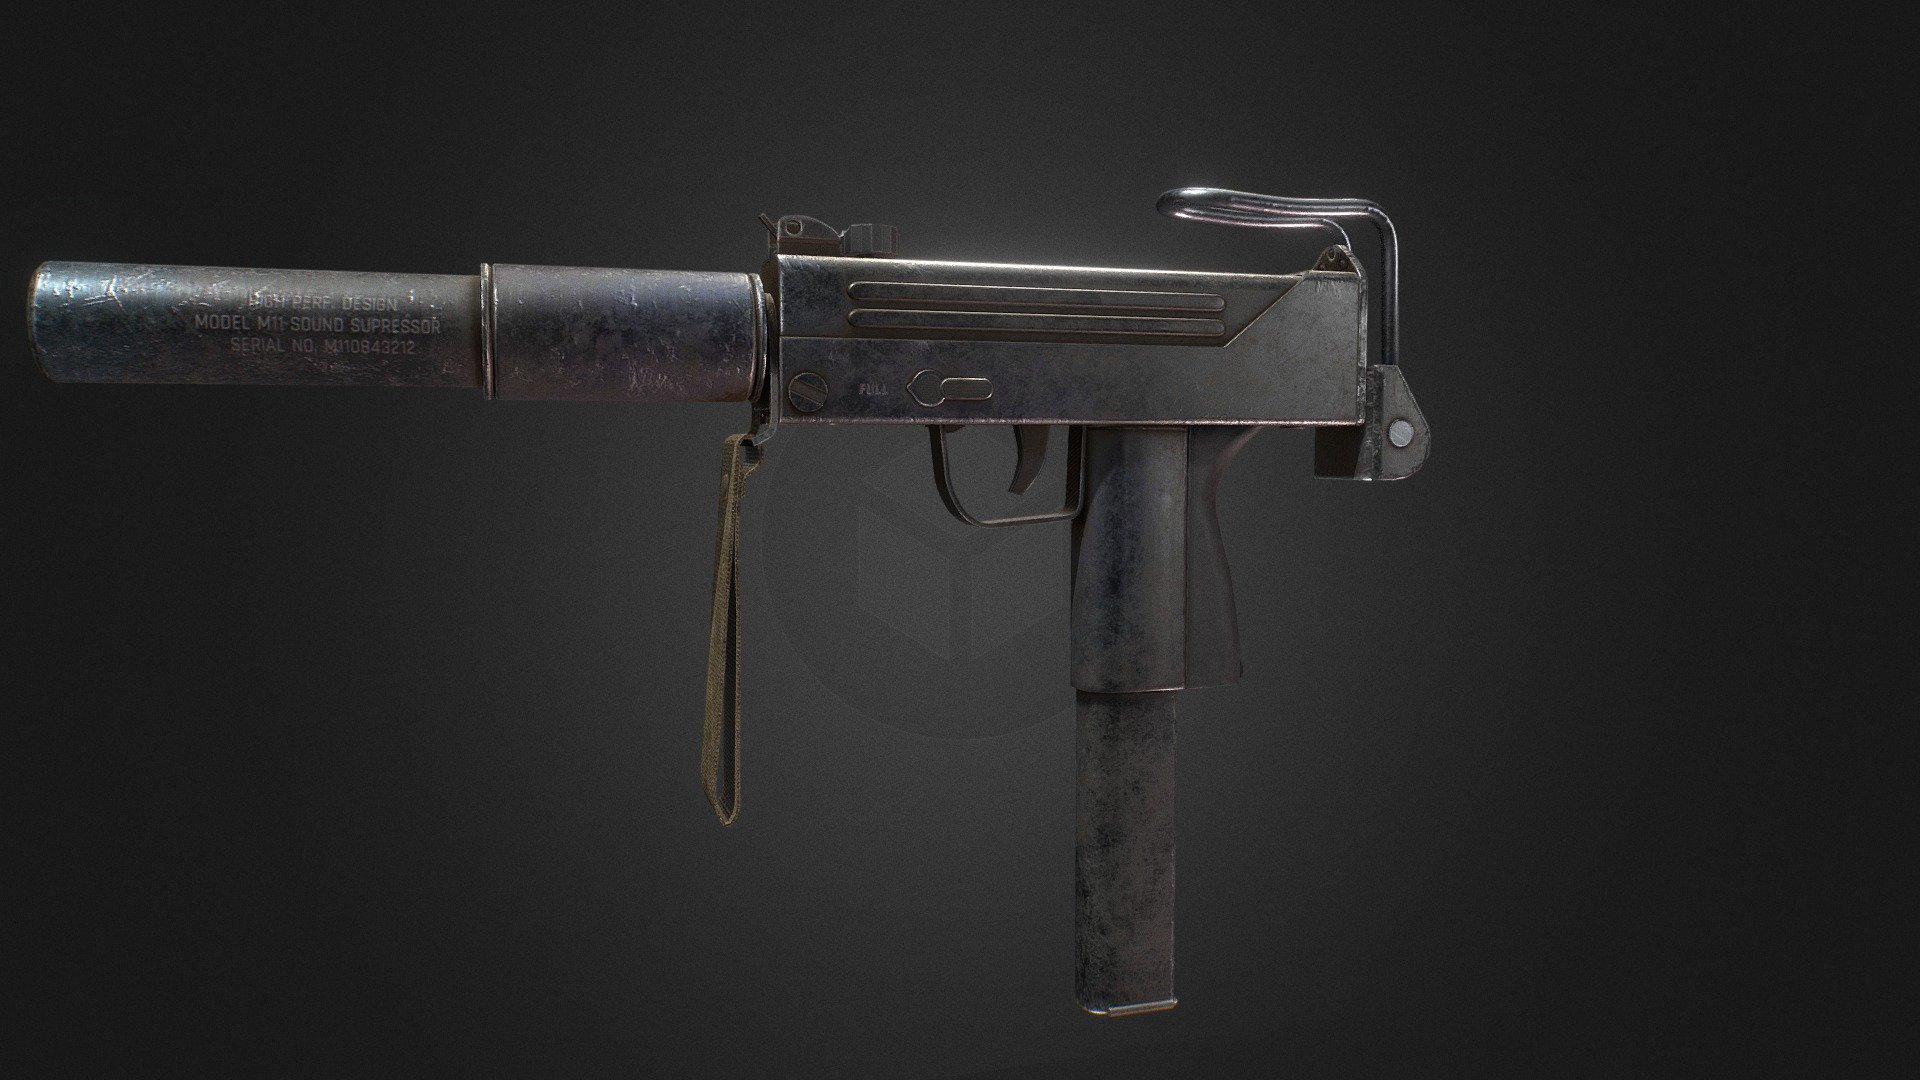 This MAC-11 was a fun project I worked on over a couple of days. It's a fairly simple model and allowed me to practice some texturing in Substance Painter 3d model